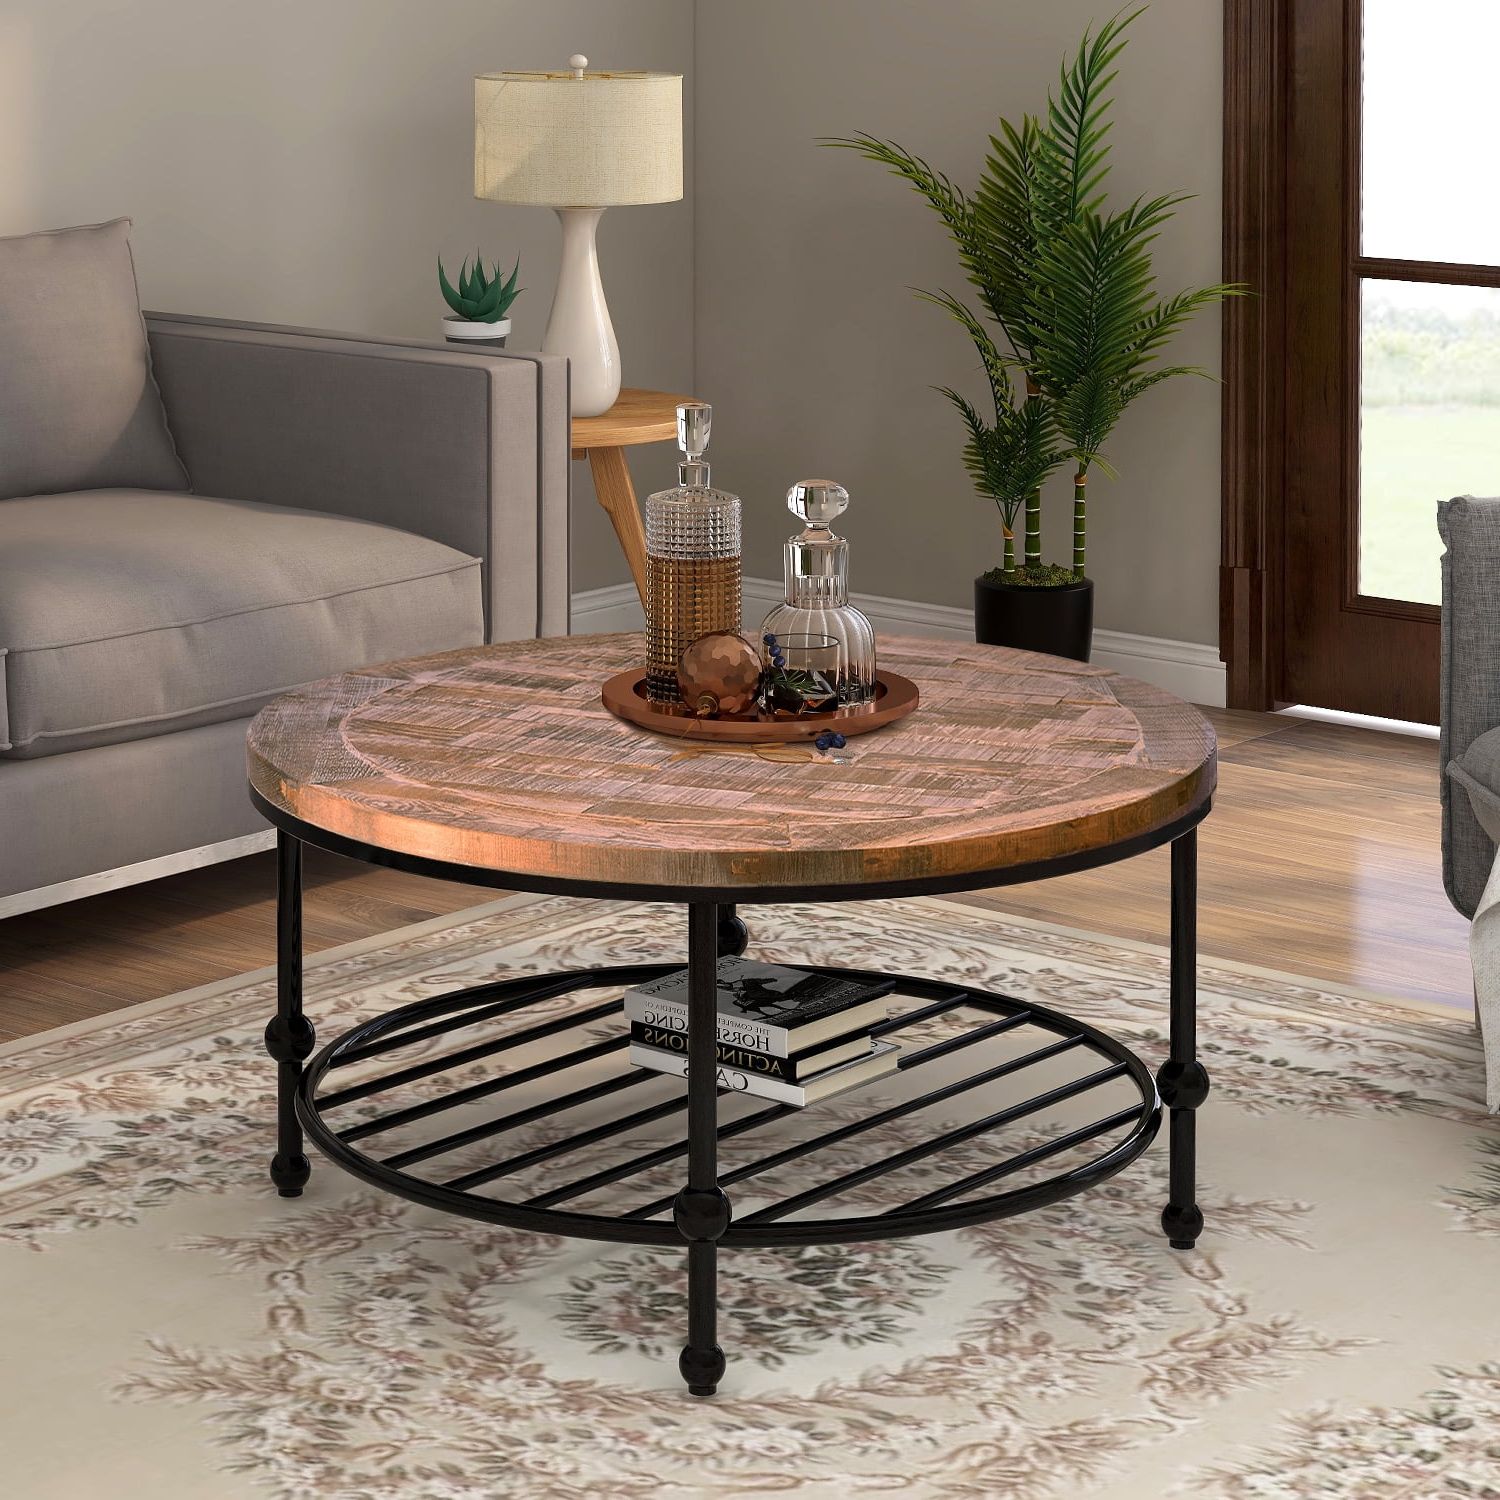 Newest Rustic Natural Round Coffee Table With Storage Shelf For Living Room In Round Coffee Tables (View 7 of 15)